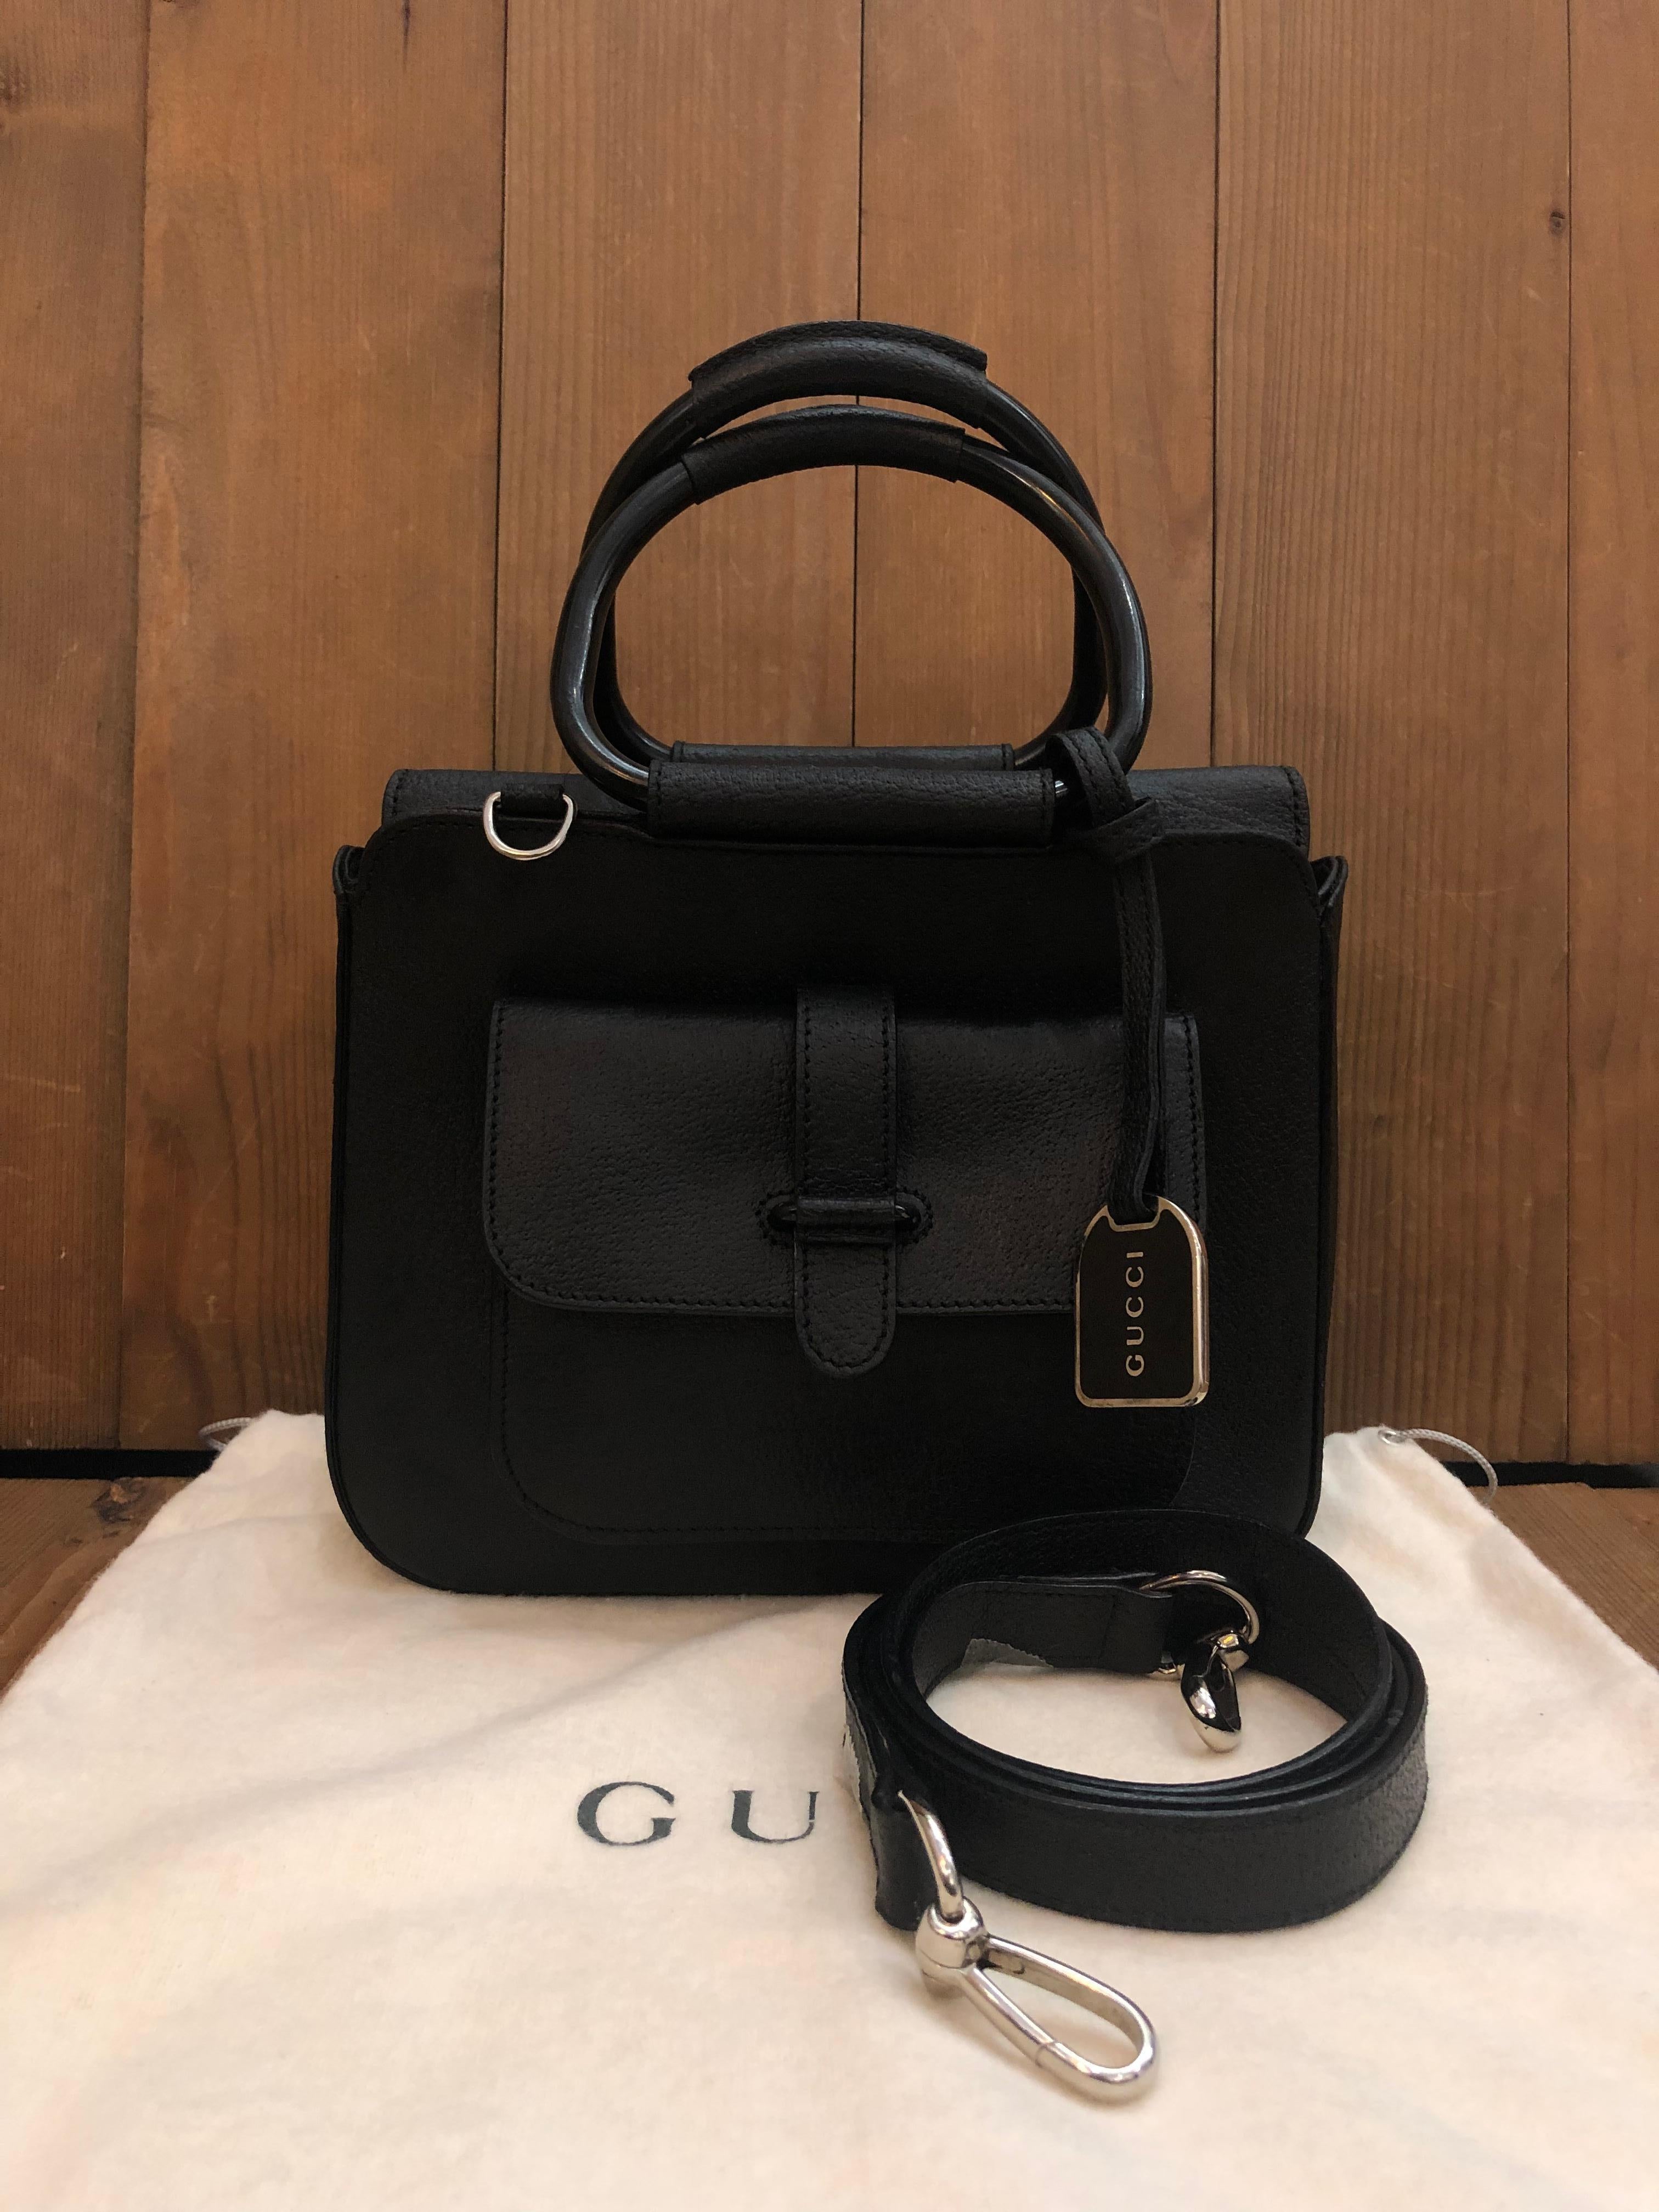 This vintage GUCCI crossbody bag is crafted of pigskin leather in black featuring silver toned hardware and rolled leather metallic handles. Top magnetic snap closure opens to a coated interior which has been professionally cleaned featuring a